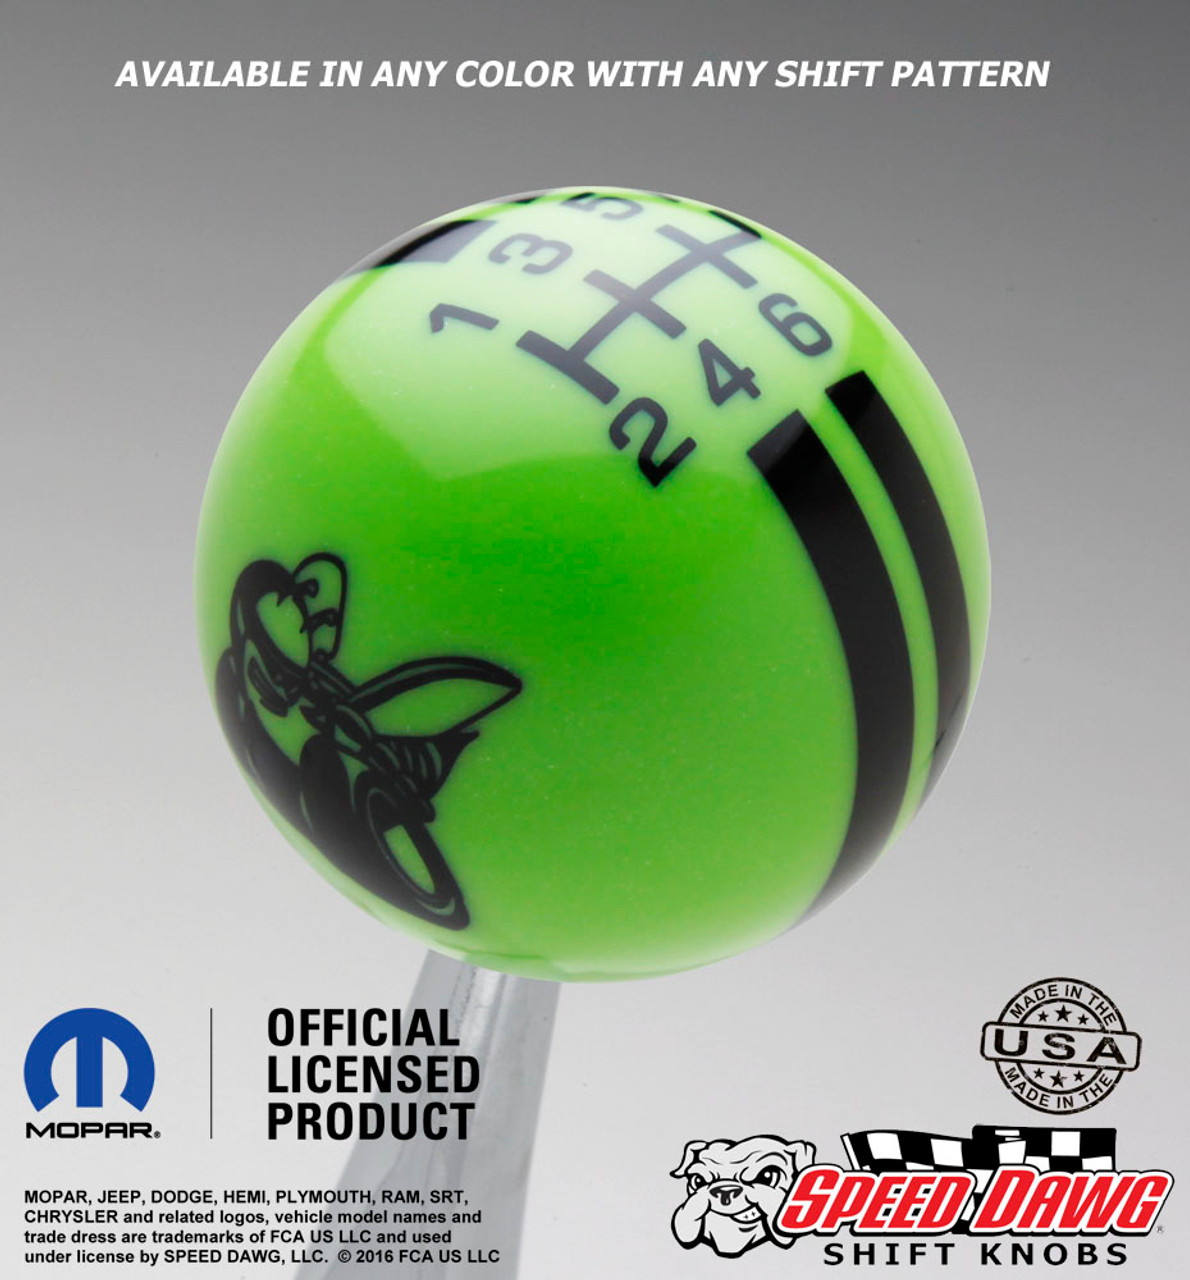 Scat Pack Go Green knob with Black graphics